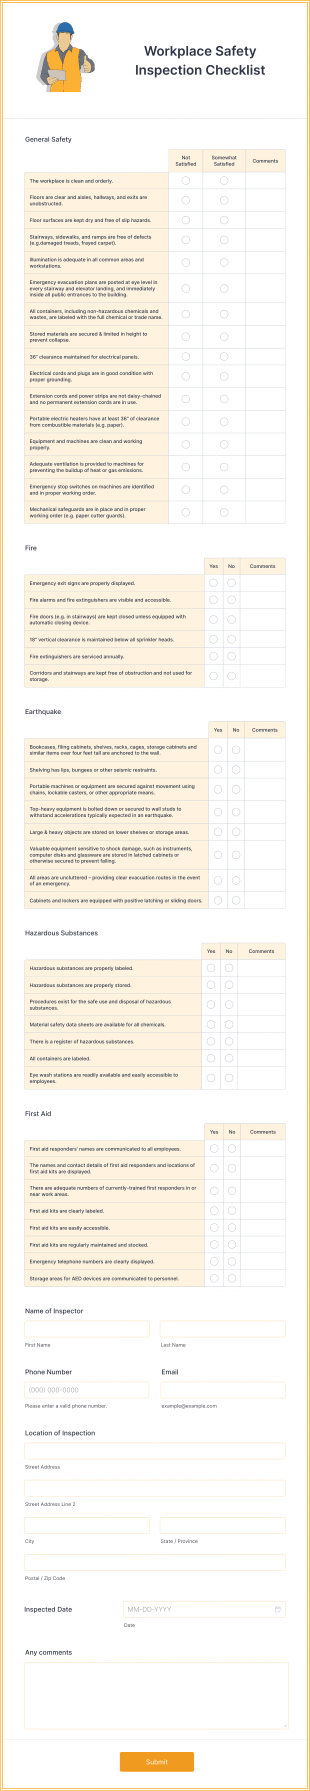 Workplace Safety Inspection Checklist Form Template